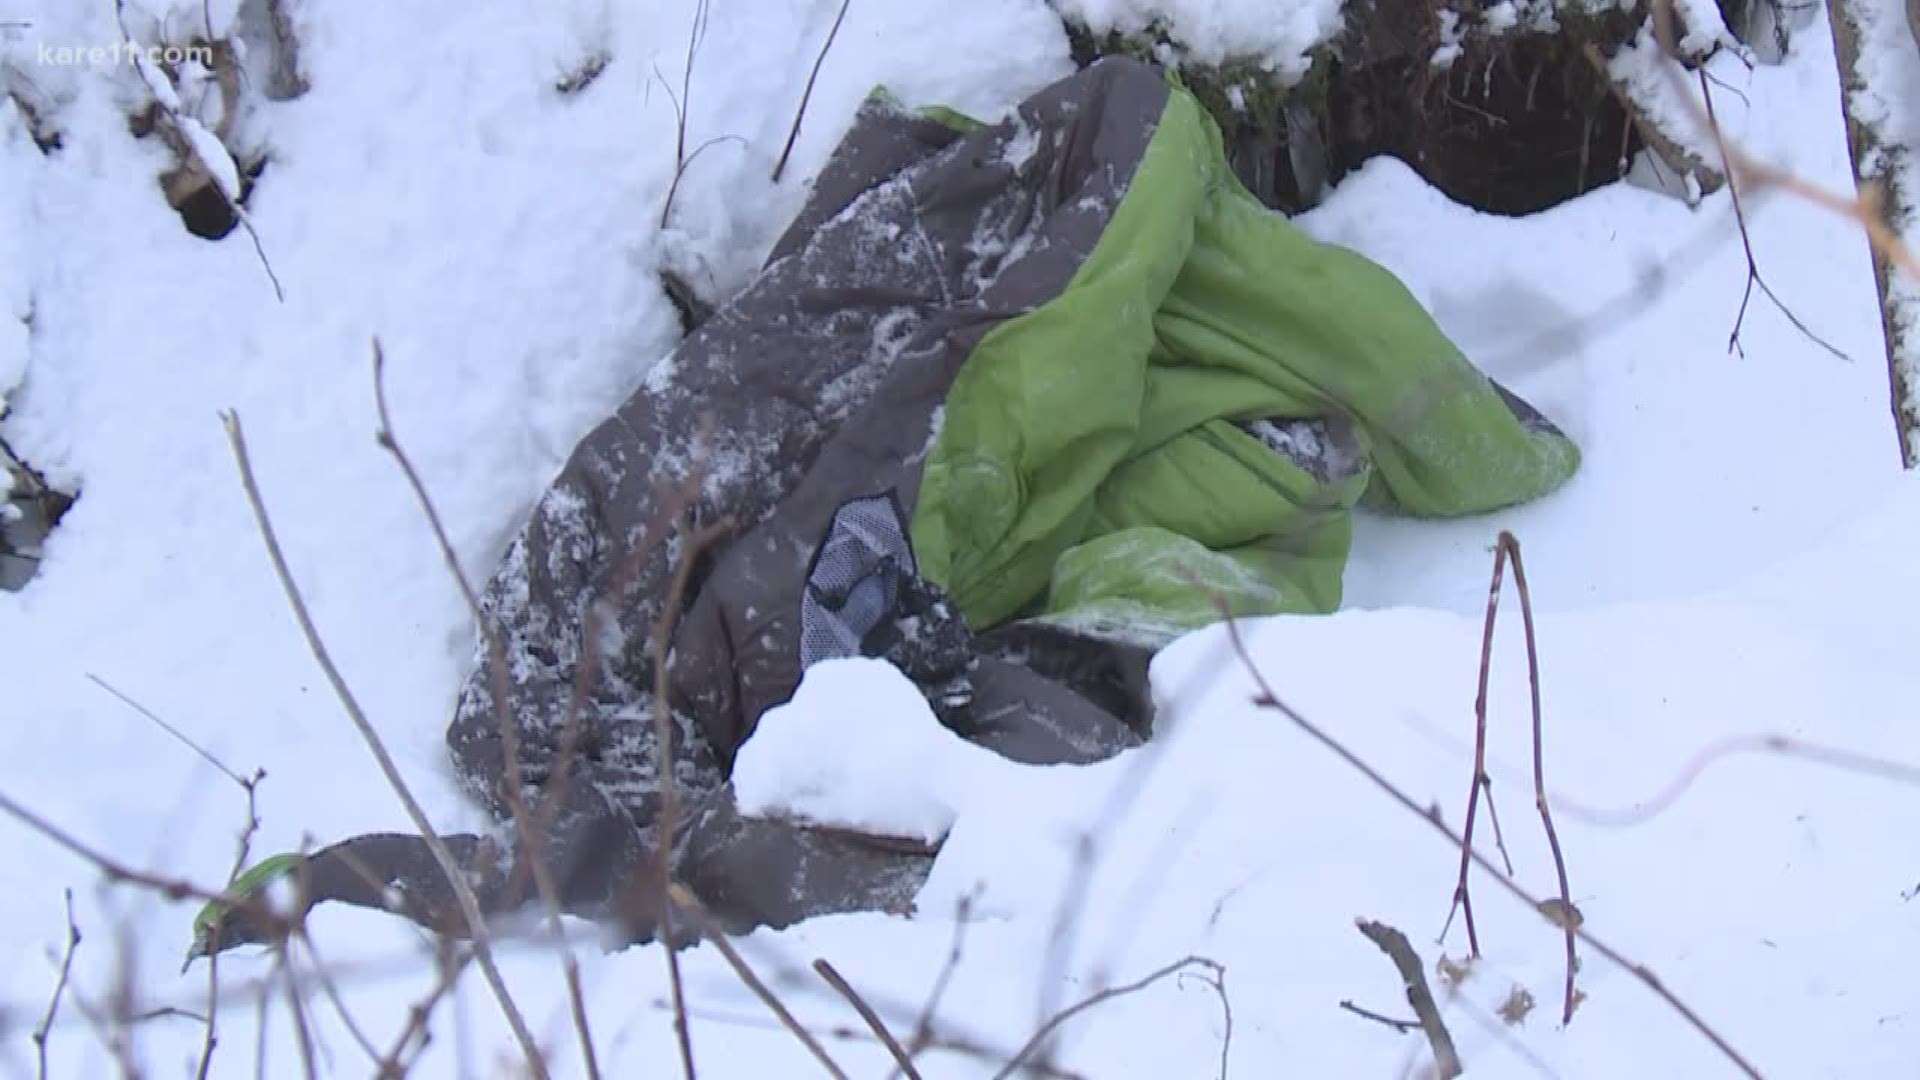 The man was rescued after being stranded for three to four days in a remote area near the Superior Hiking Trail.